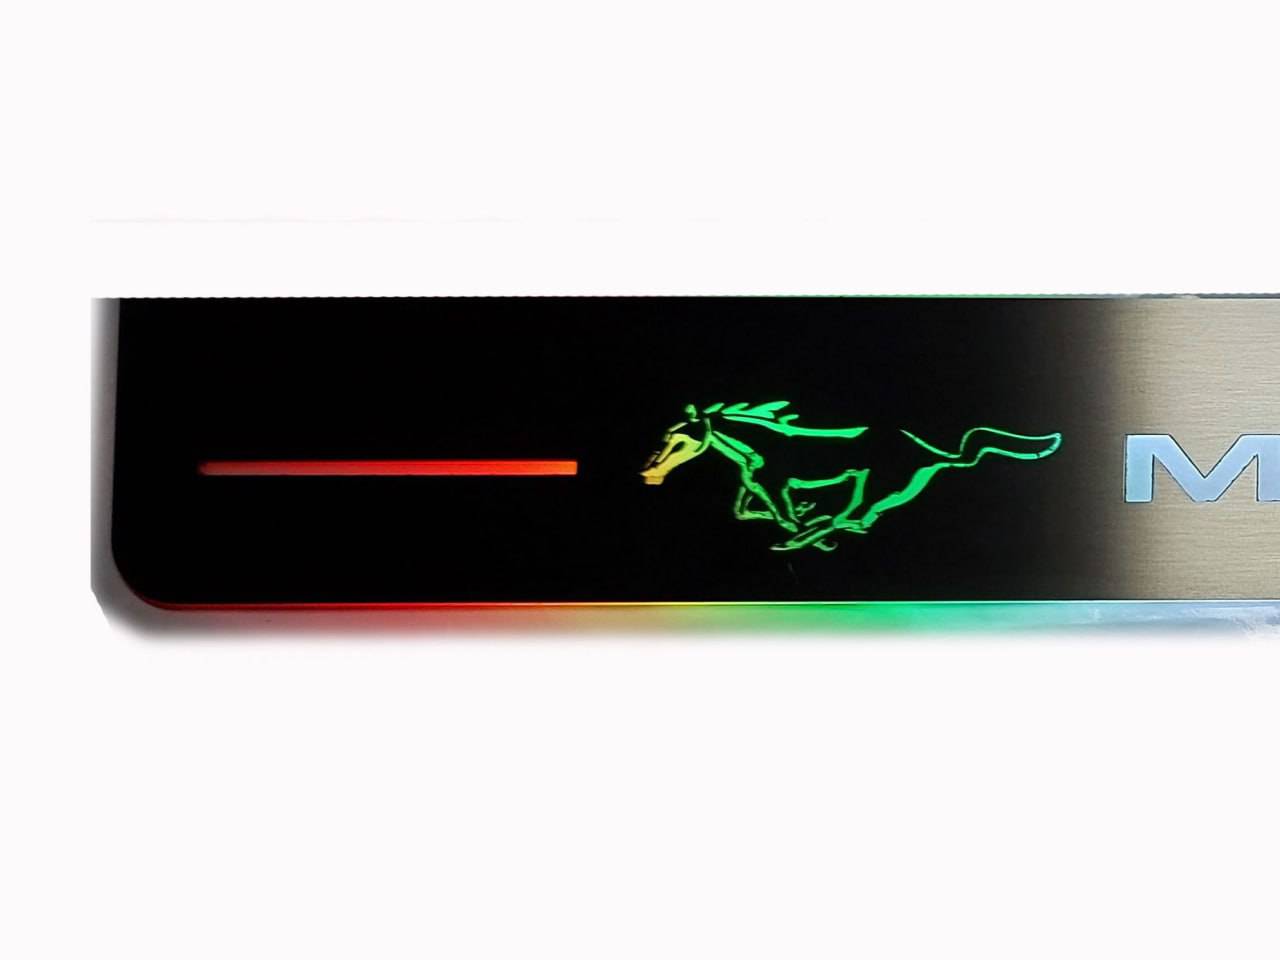 Ford Mustang VI Illuminated LED Door Sill Plates With Mustang Logo - decoinfabric